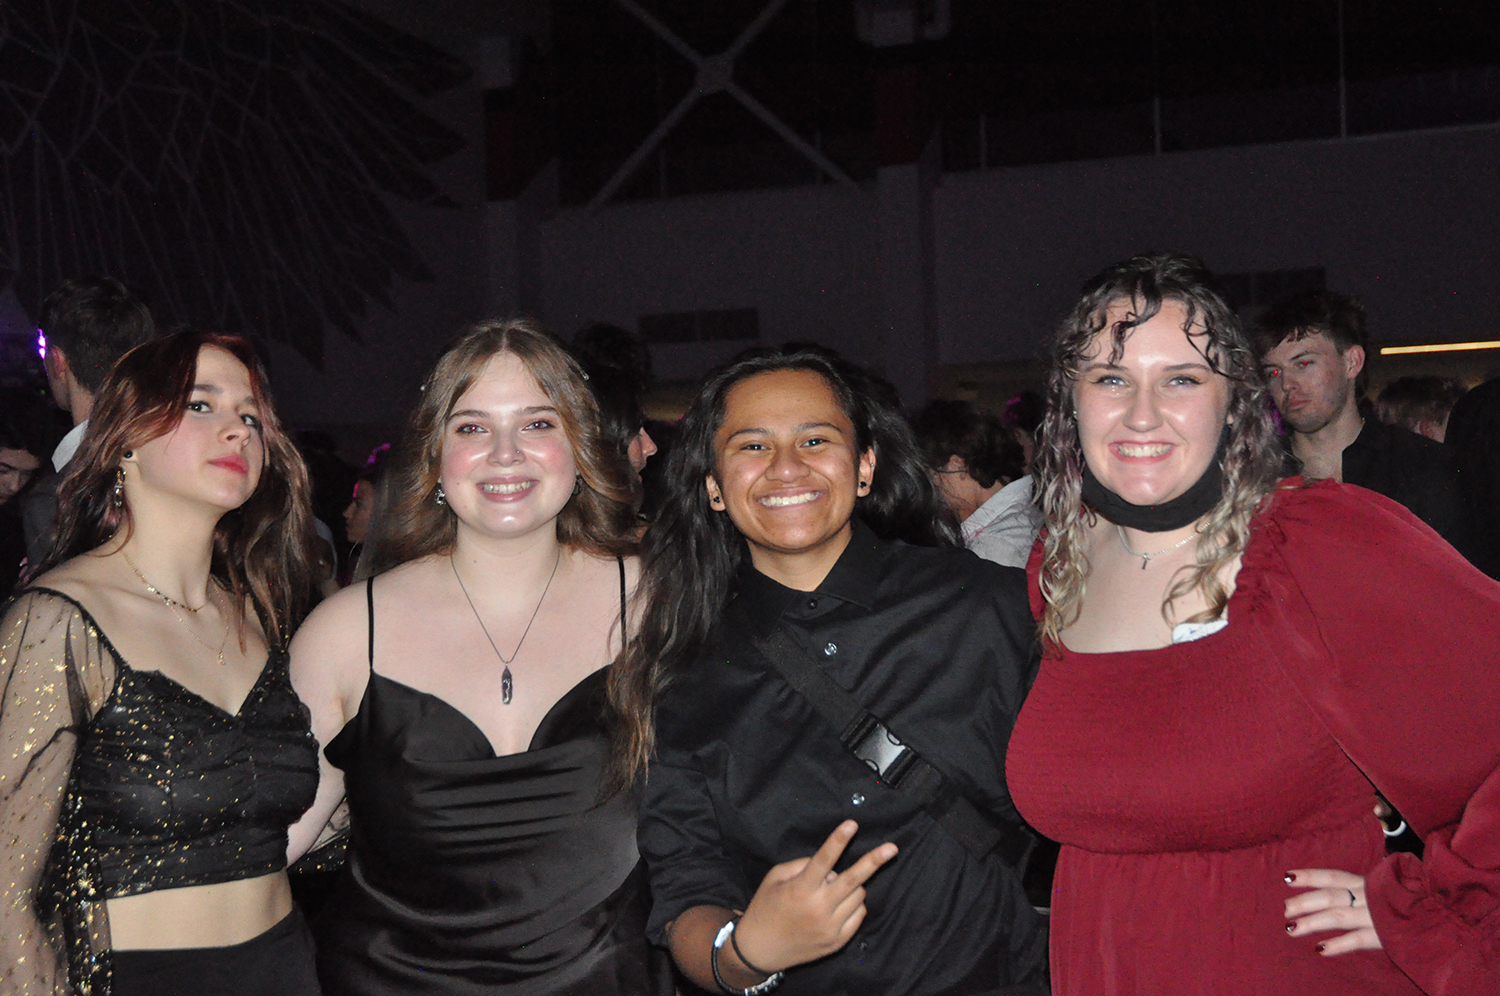 Students+Enjoy+Annual+Sweethearts+Dance+in+Spite+of+Covid+Protocols